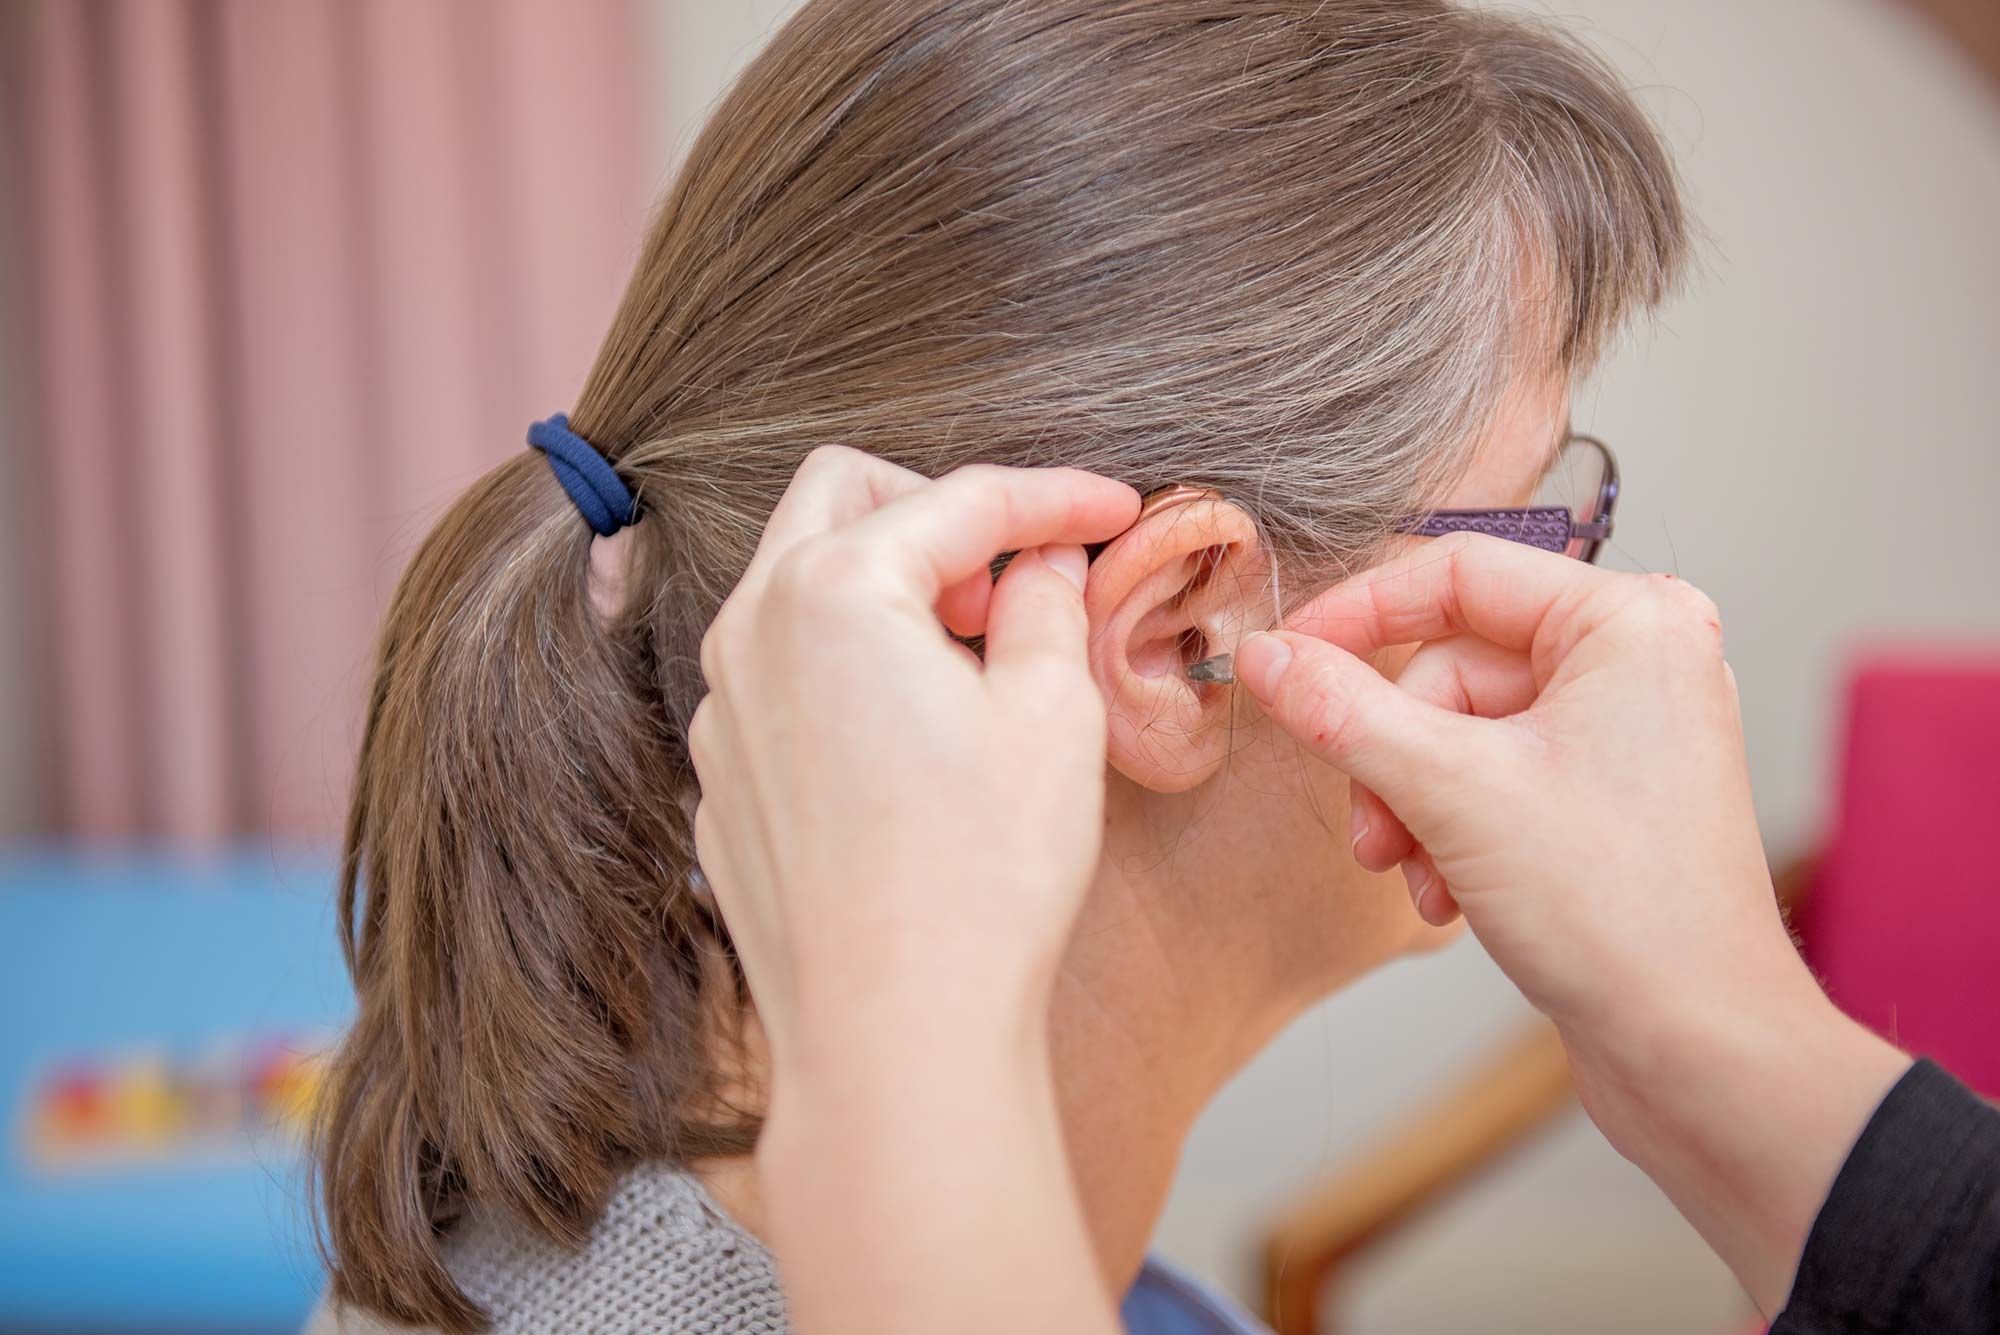 A Woman Having a Hearing Aid Fitting